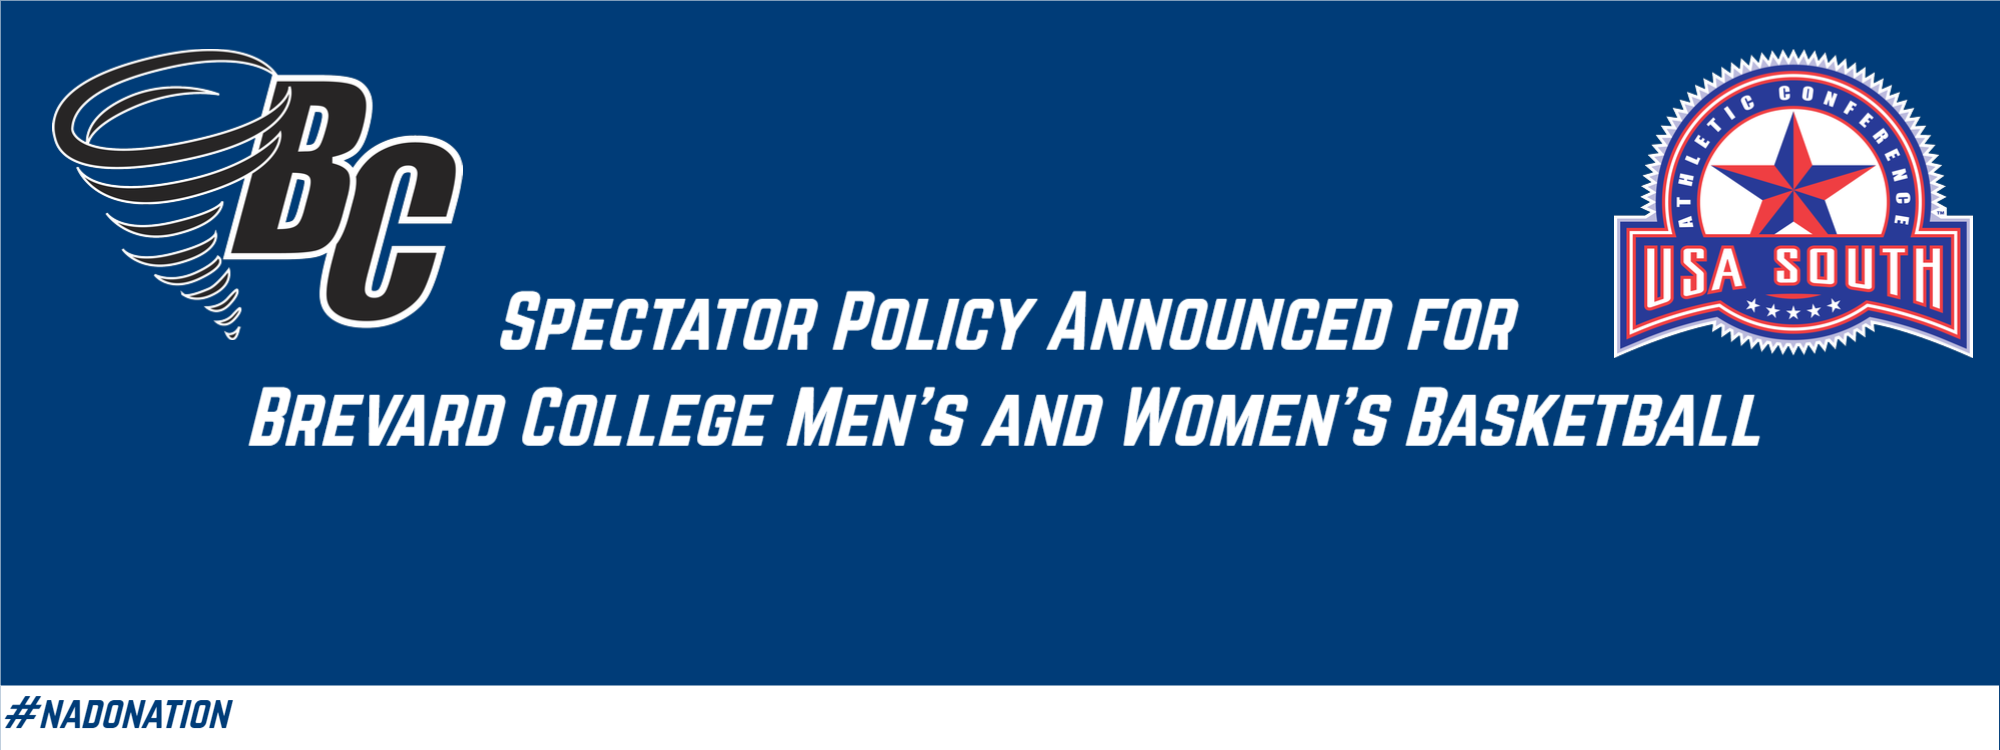 Spectator Policy Announced for Brevard College Men’s and Women’s Basketball Home Games